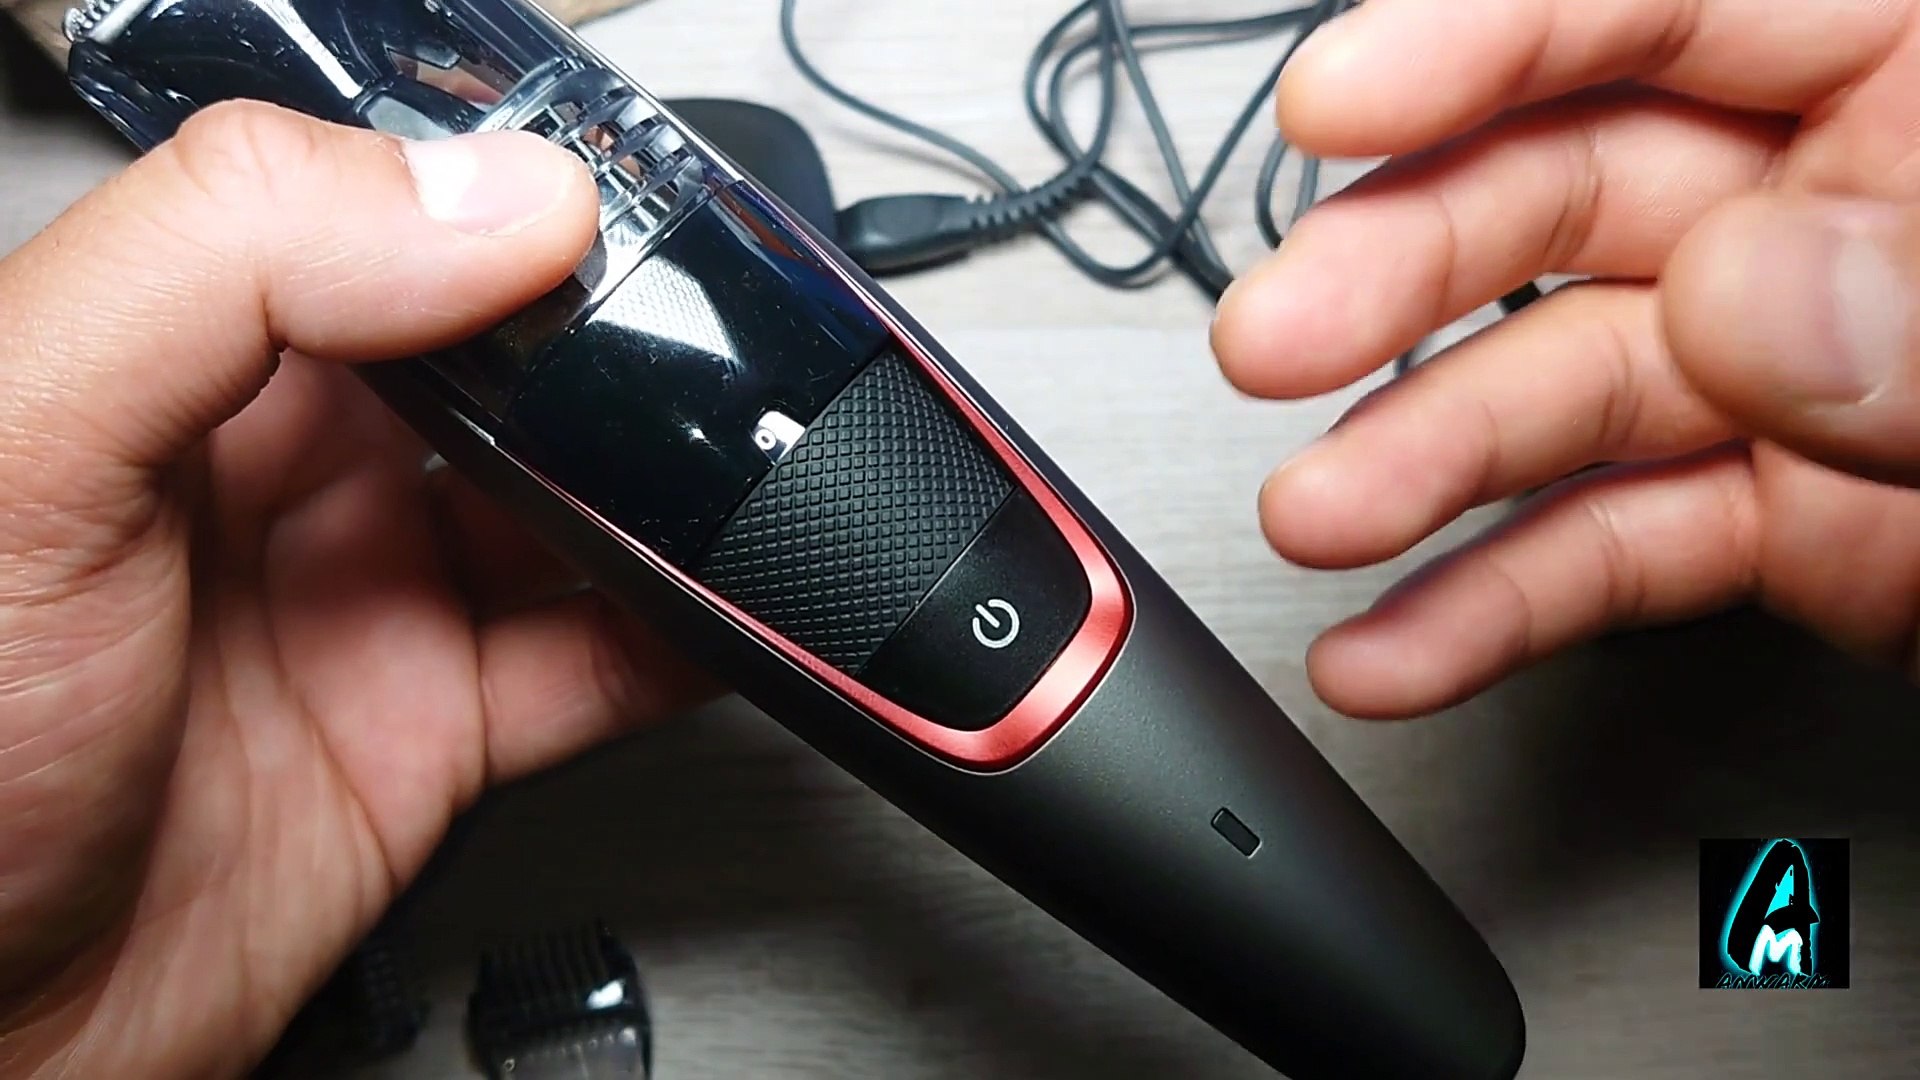 Philips Series 7000 Beard and Stubble Less Mess Vacuum Trimmer BT7512  (Review) - video Dailymotion